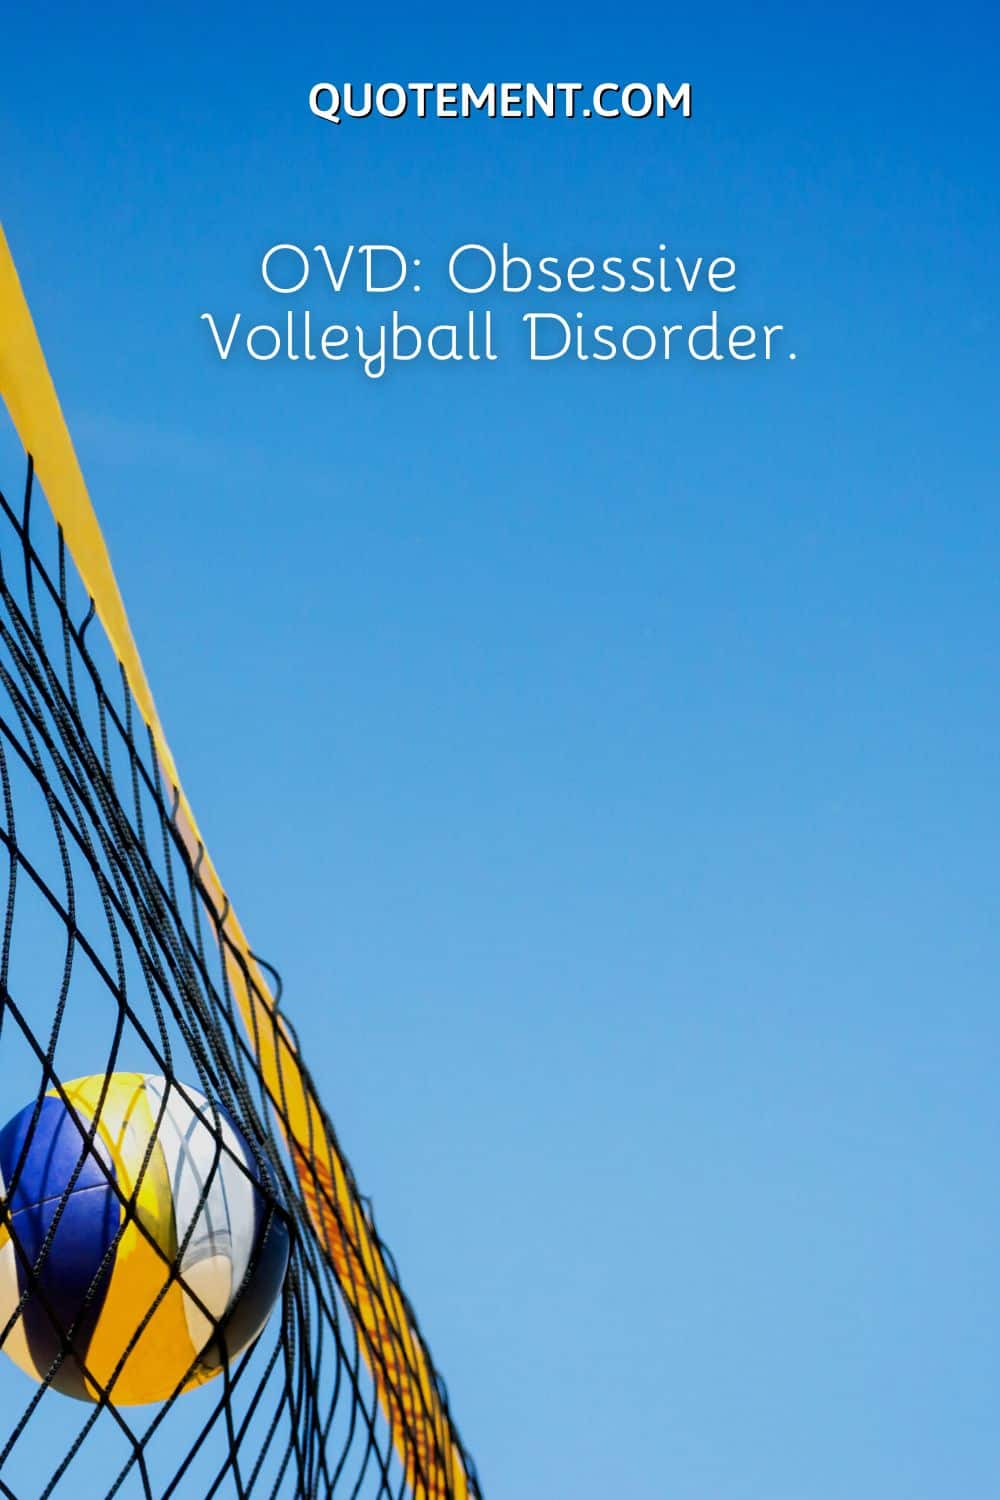 OVD Obsessive Volleyball Disorder.